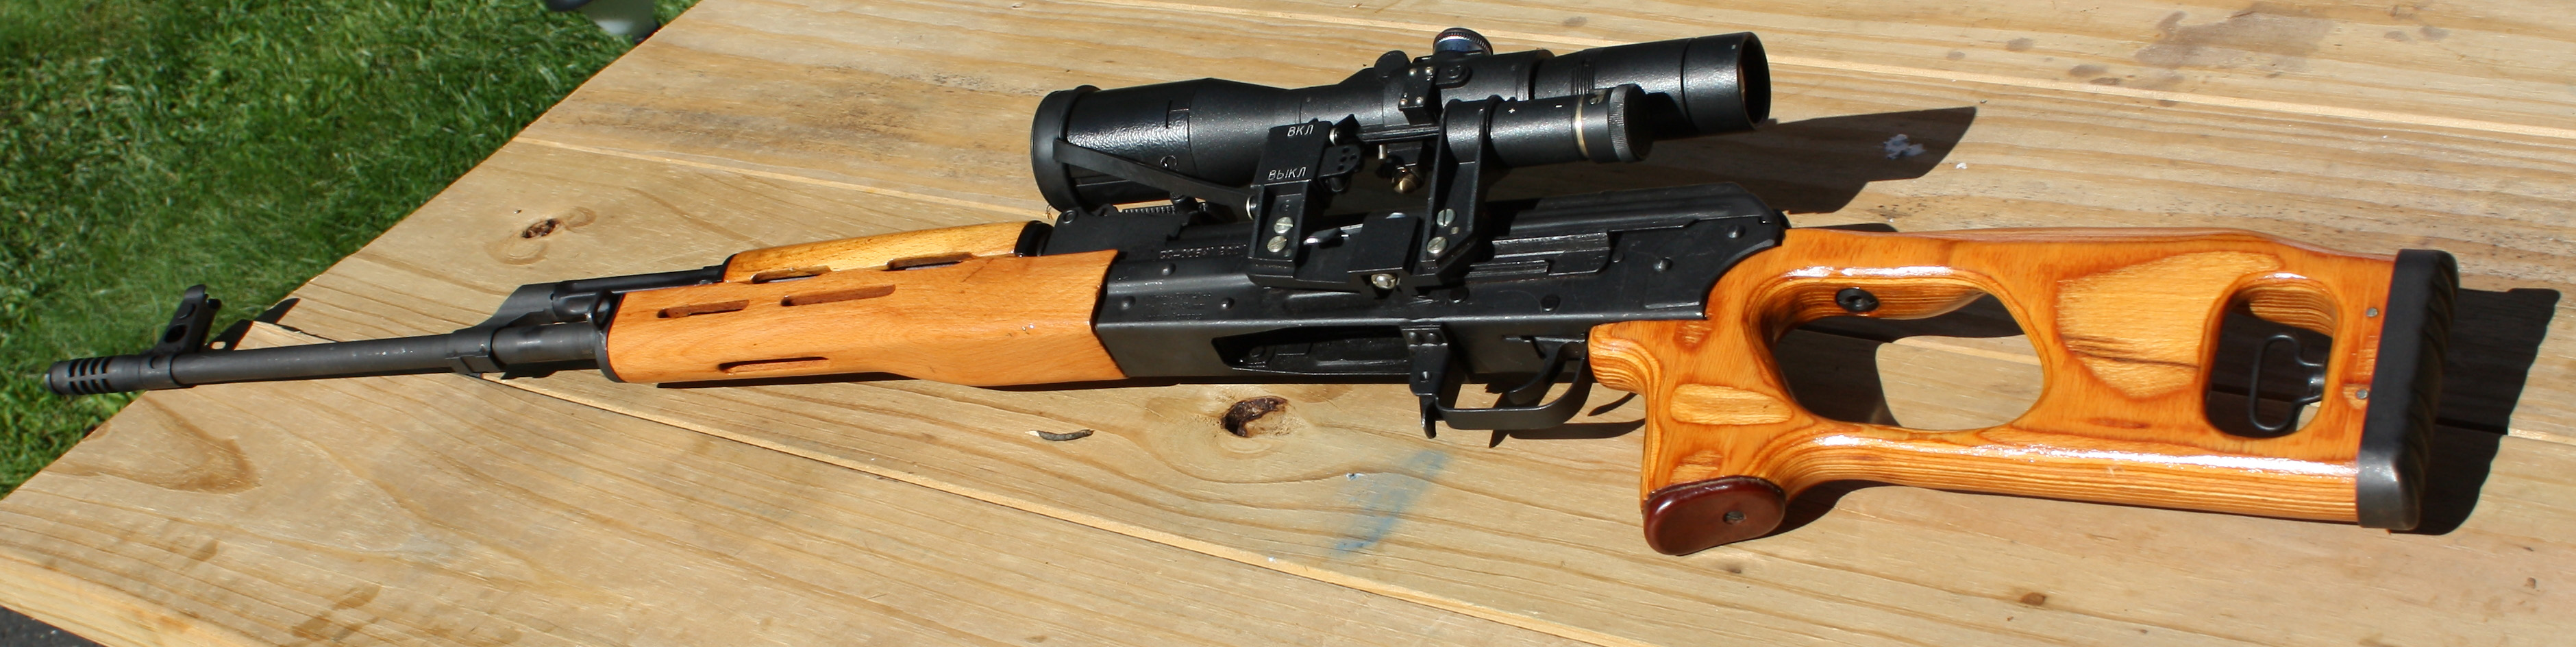 PSL-Sniper_Rifle_with_Scope.jpg